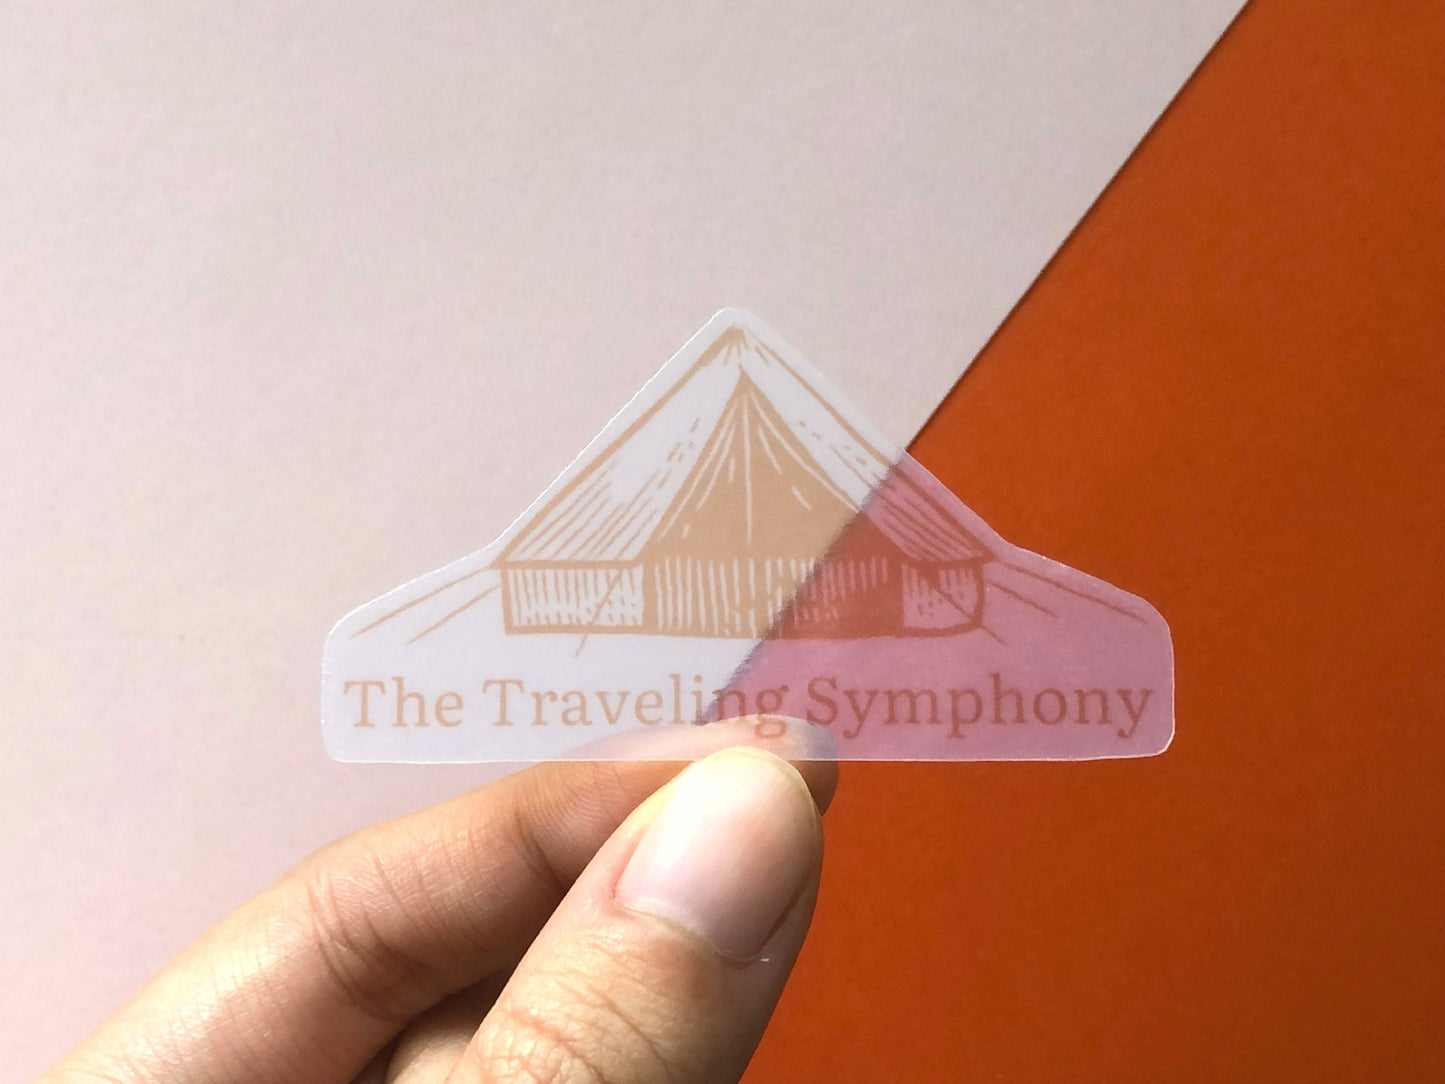 Station Eleven Sticker | The Traveling Symphony | Bookish Gifts | Transparent Stickers